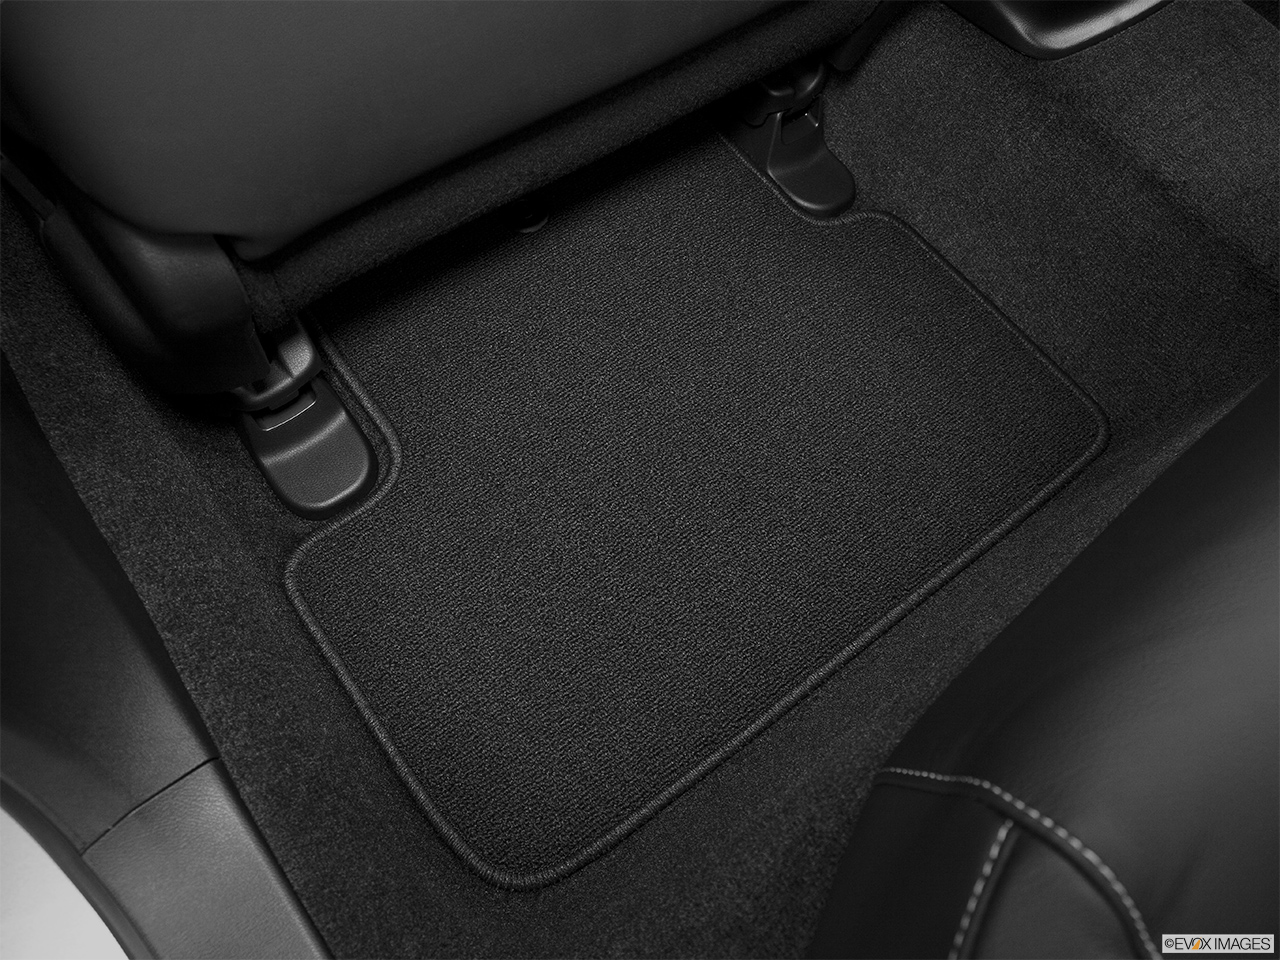 2014 Acura TL Special Edition Rear driver's side floor mat. Mid-seat level from outside looking in. 